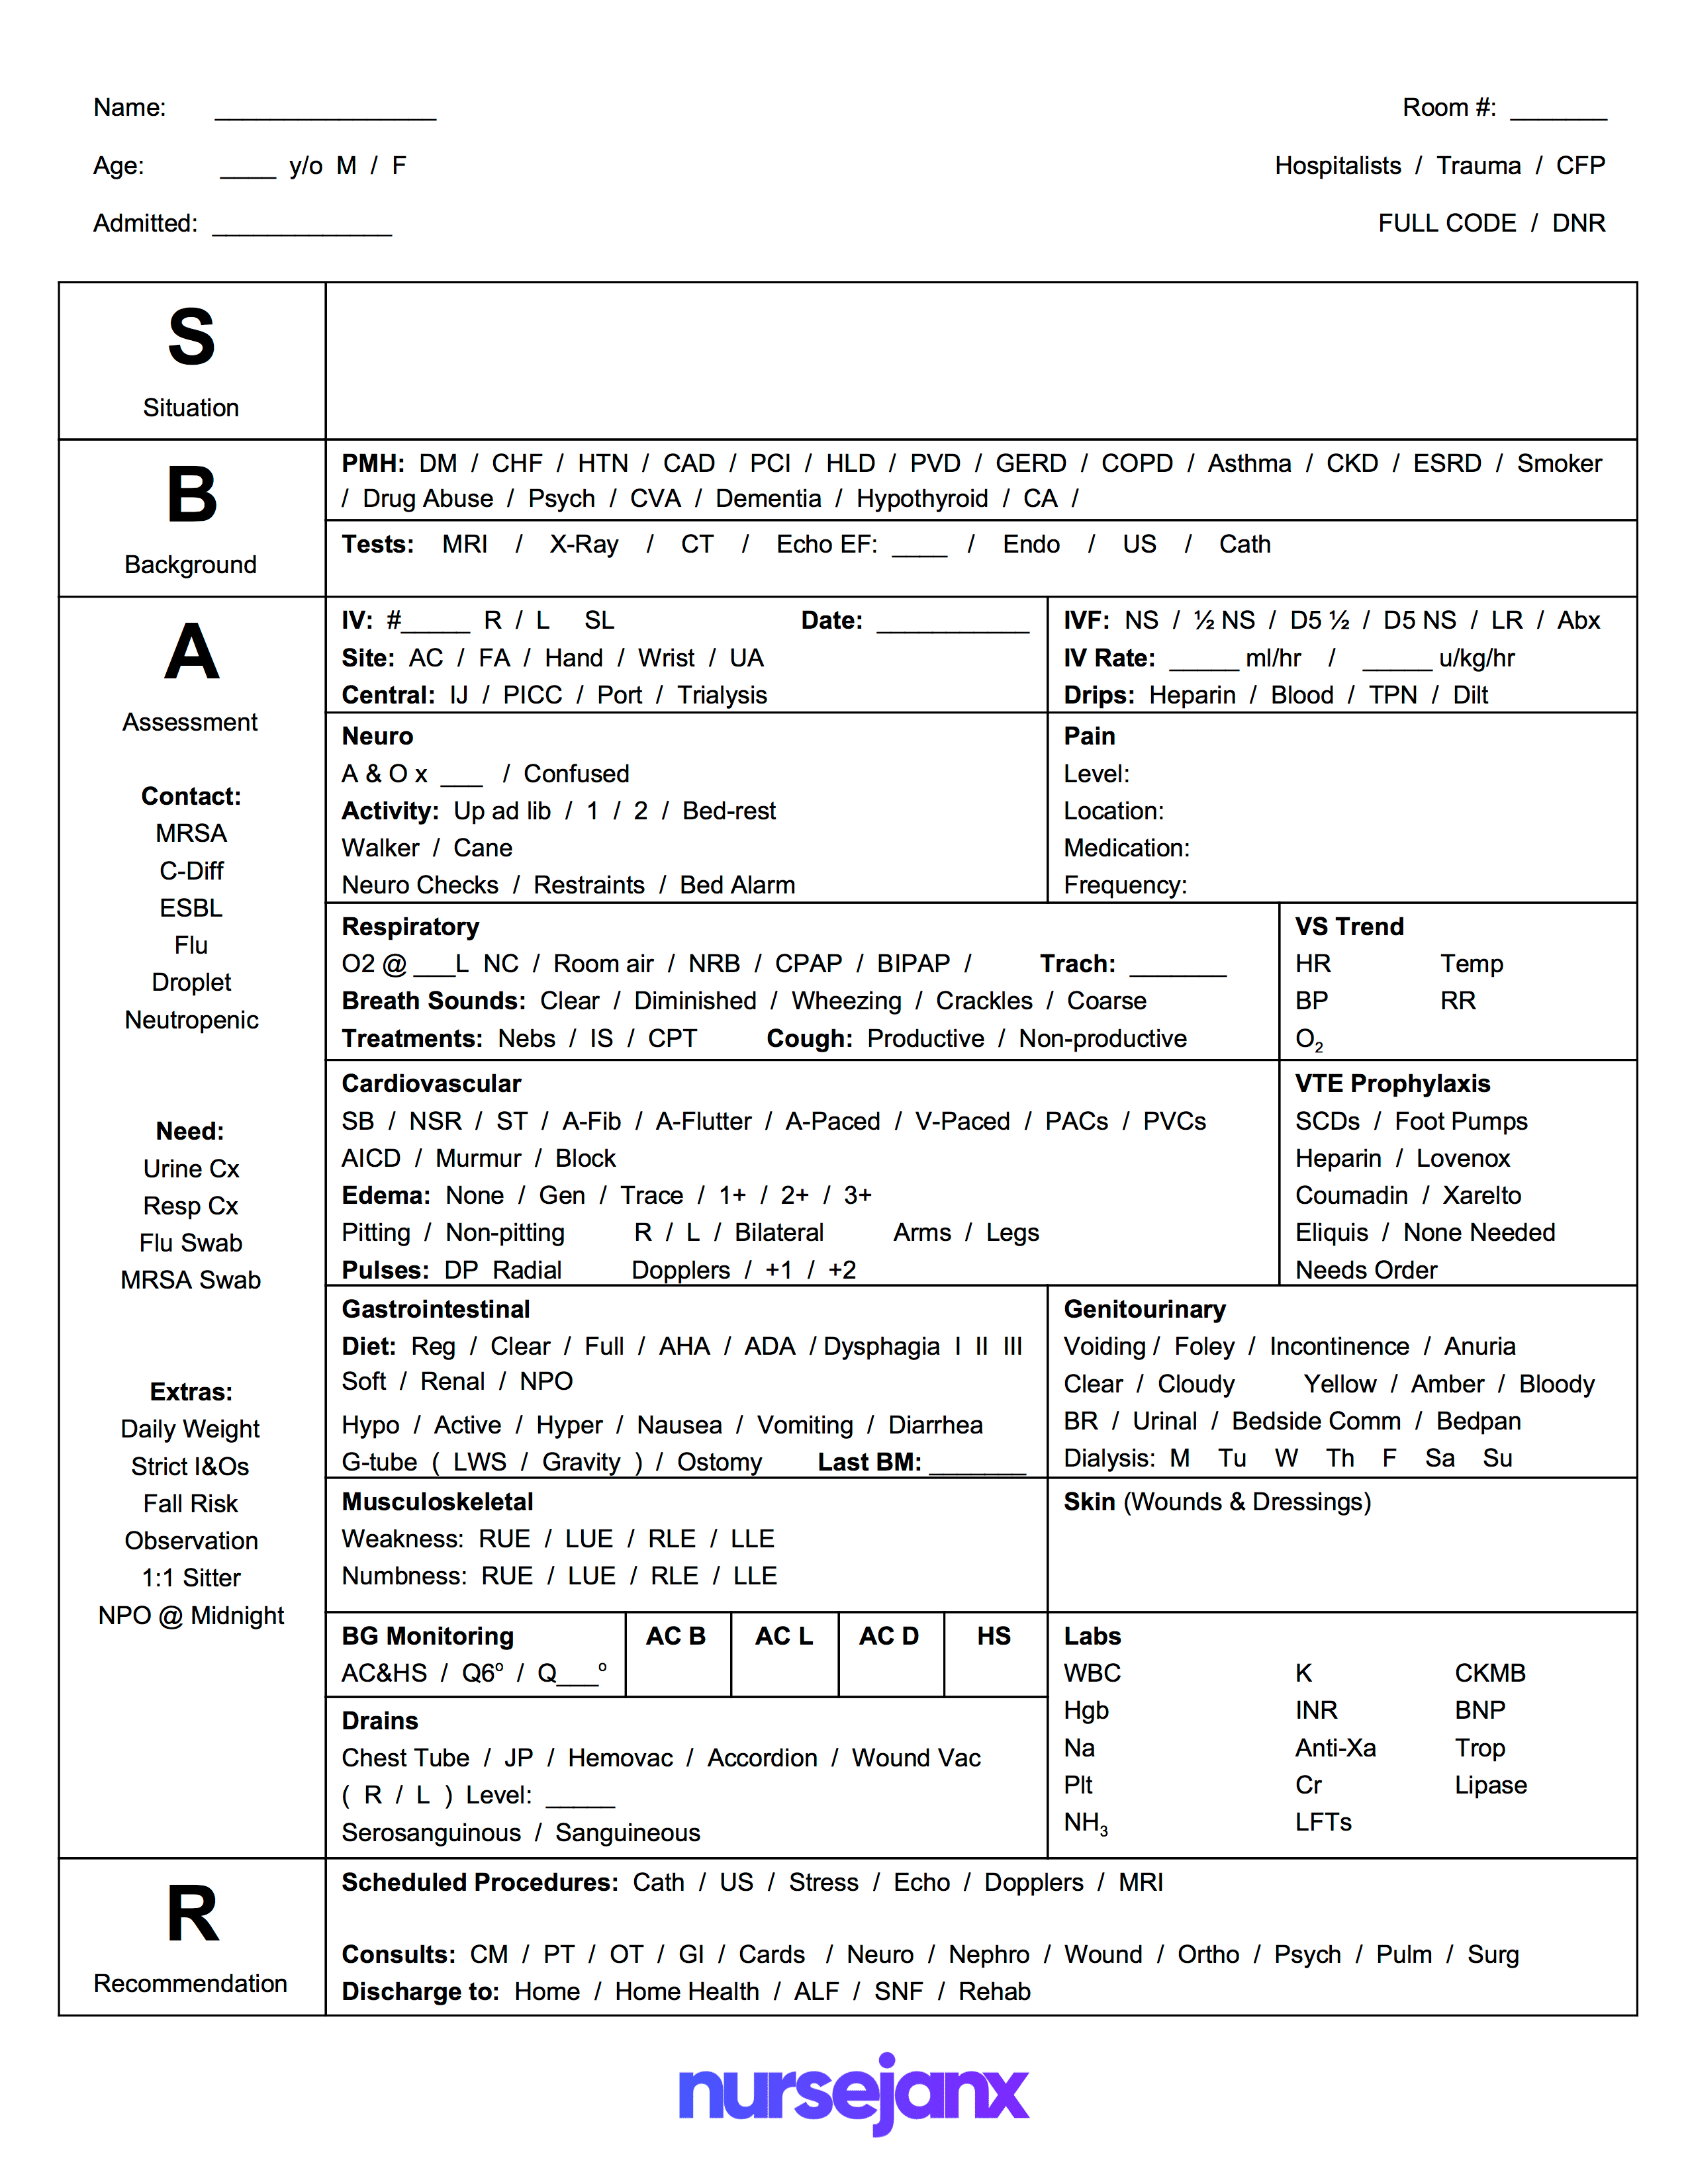 Free Download! This Is A Full Size Sbar Nursing Brain Report With Med Surg Report Sheet Templates